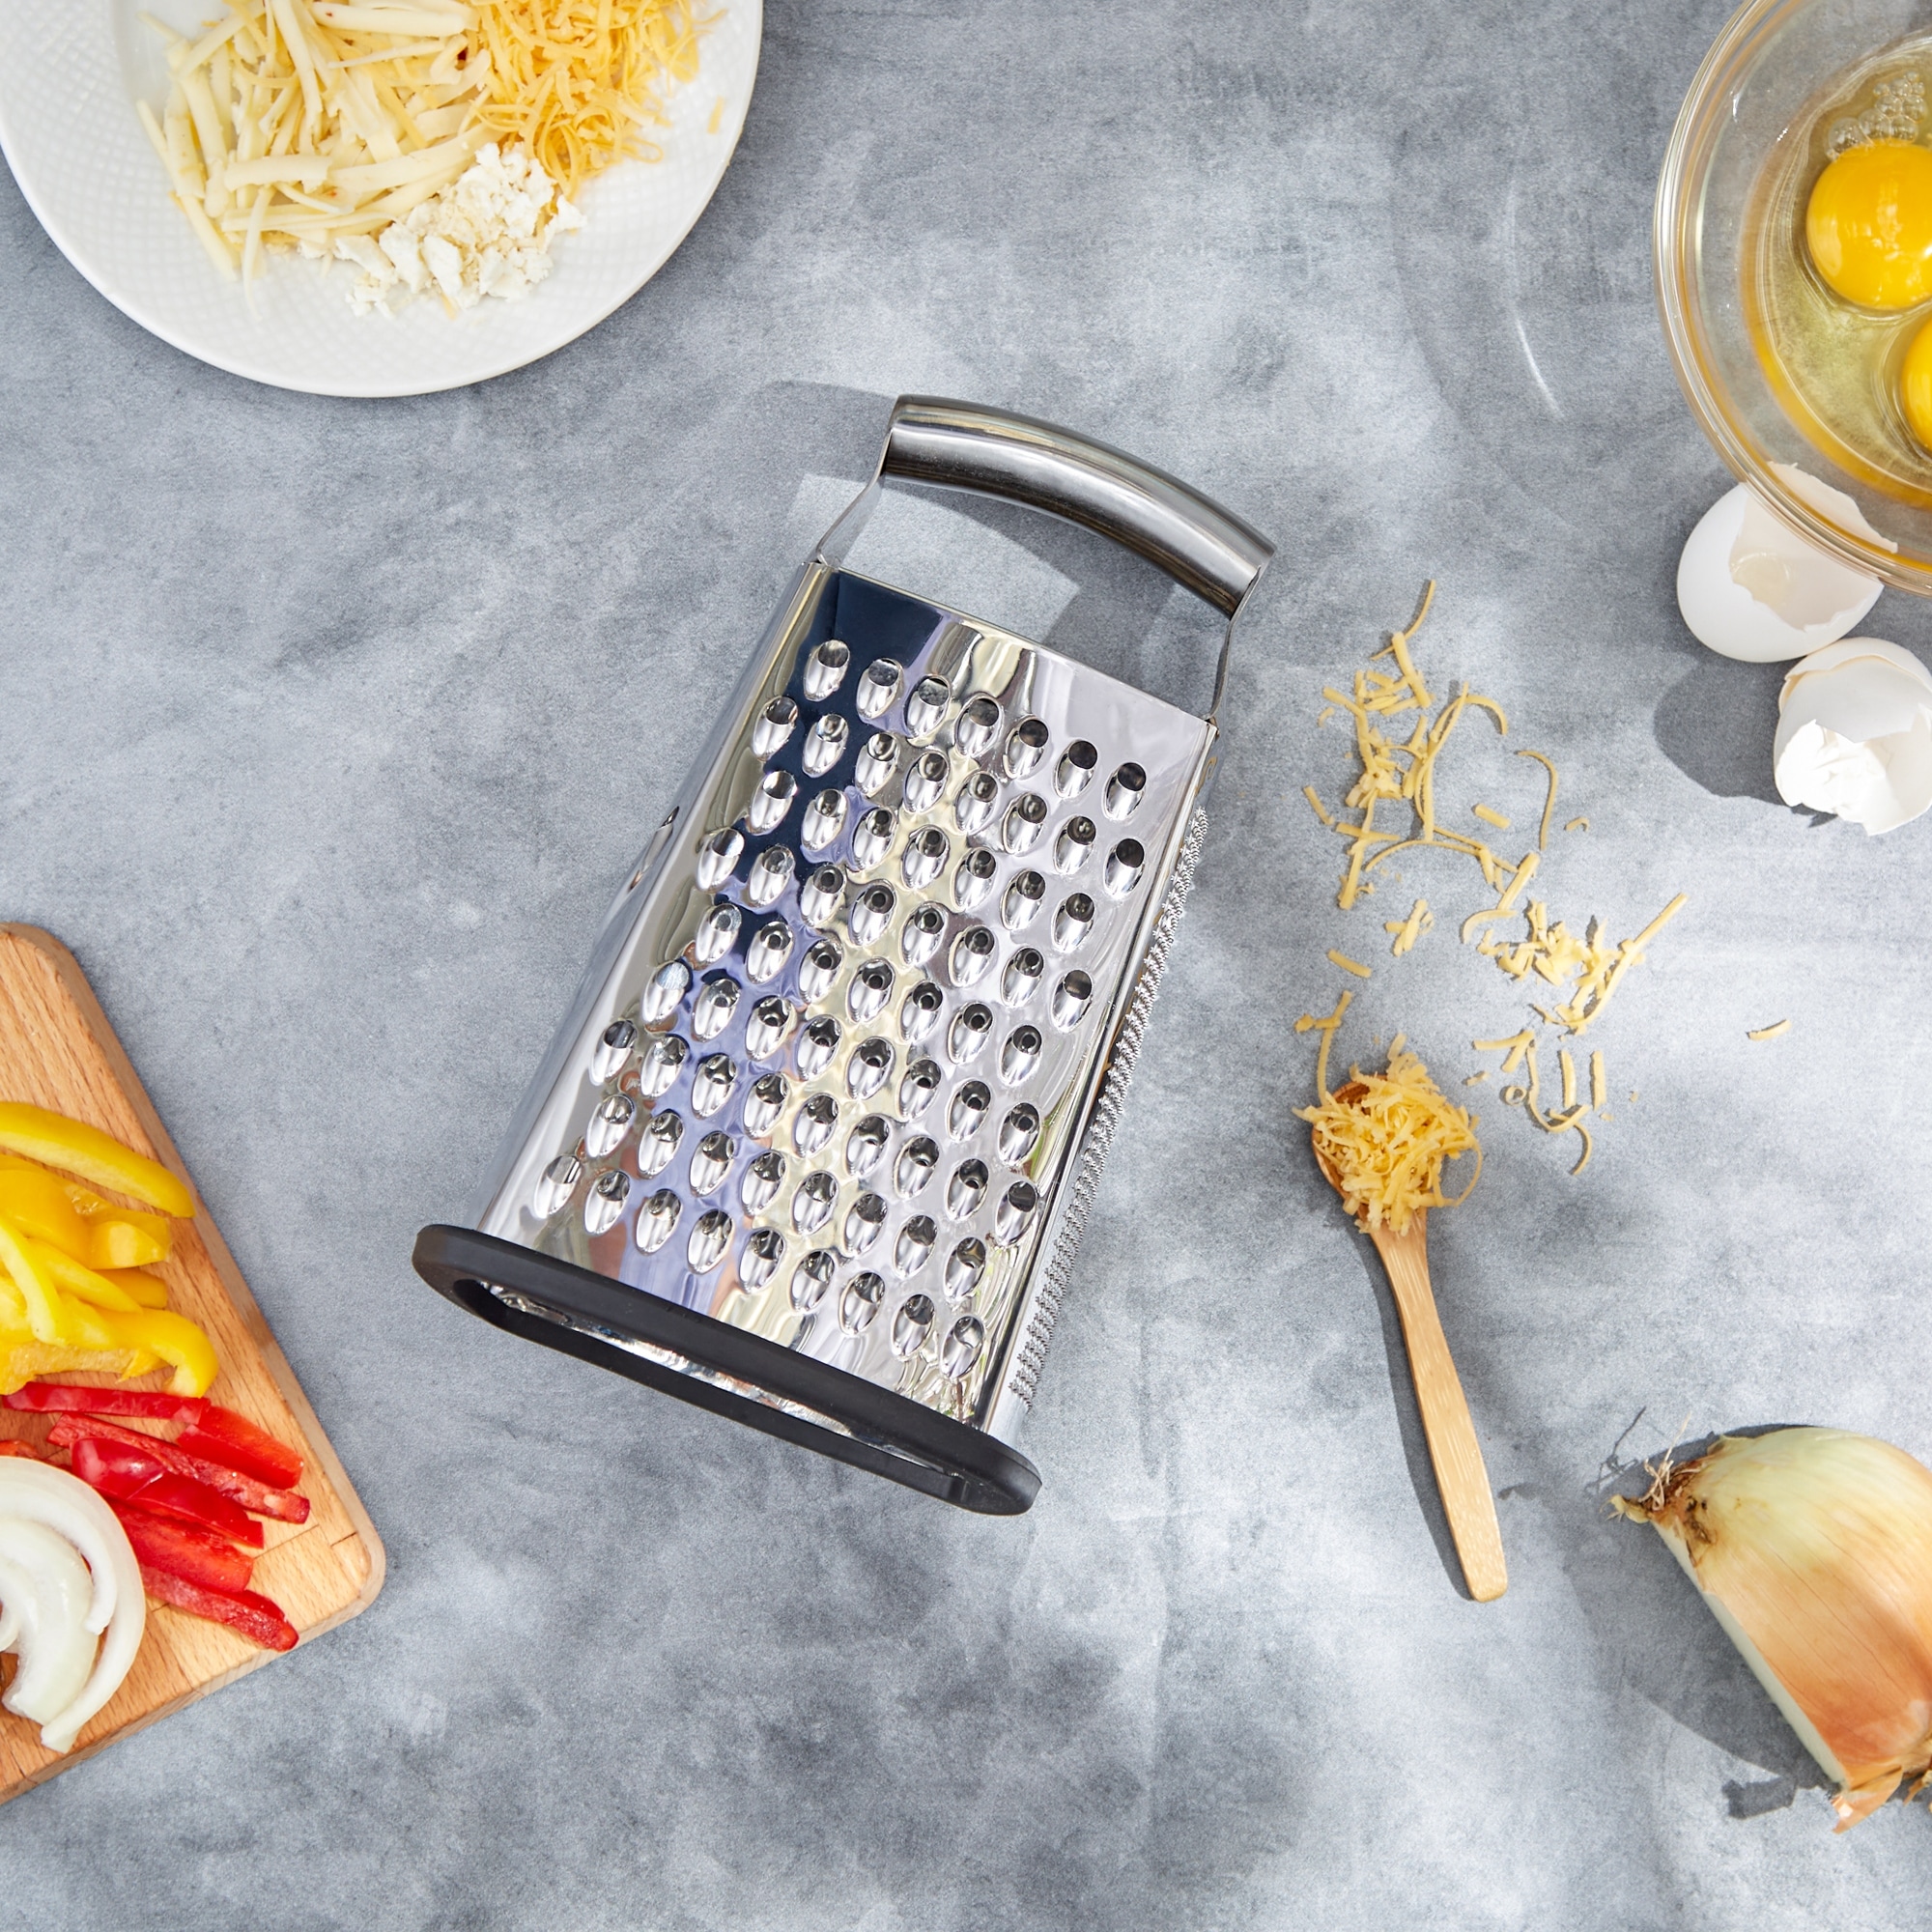 https://ak1.ostkcdn.com/images/products/is/images/direct/4dfc9759d0be17e16021b48e21025650463c04d7/Deluxe-Handheld-Box-Grater.jpg